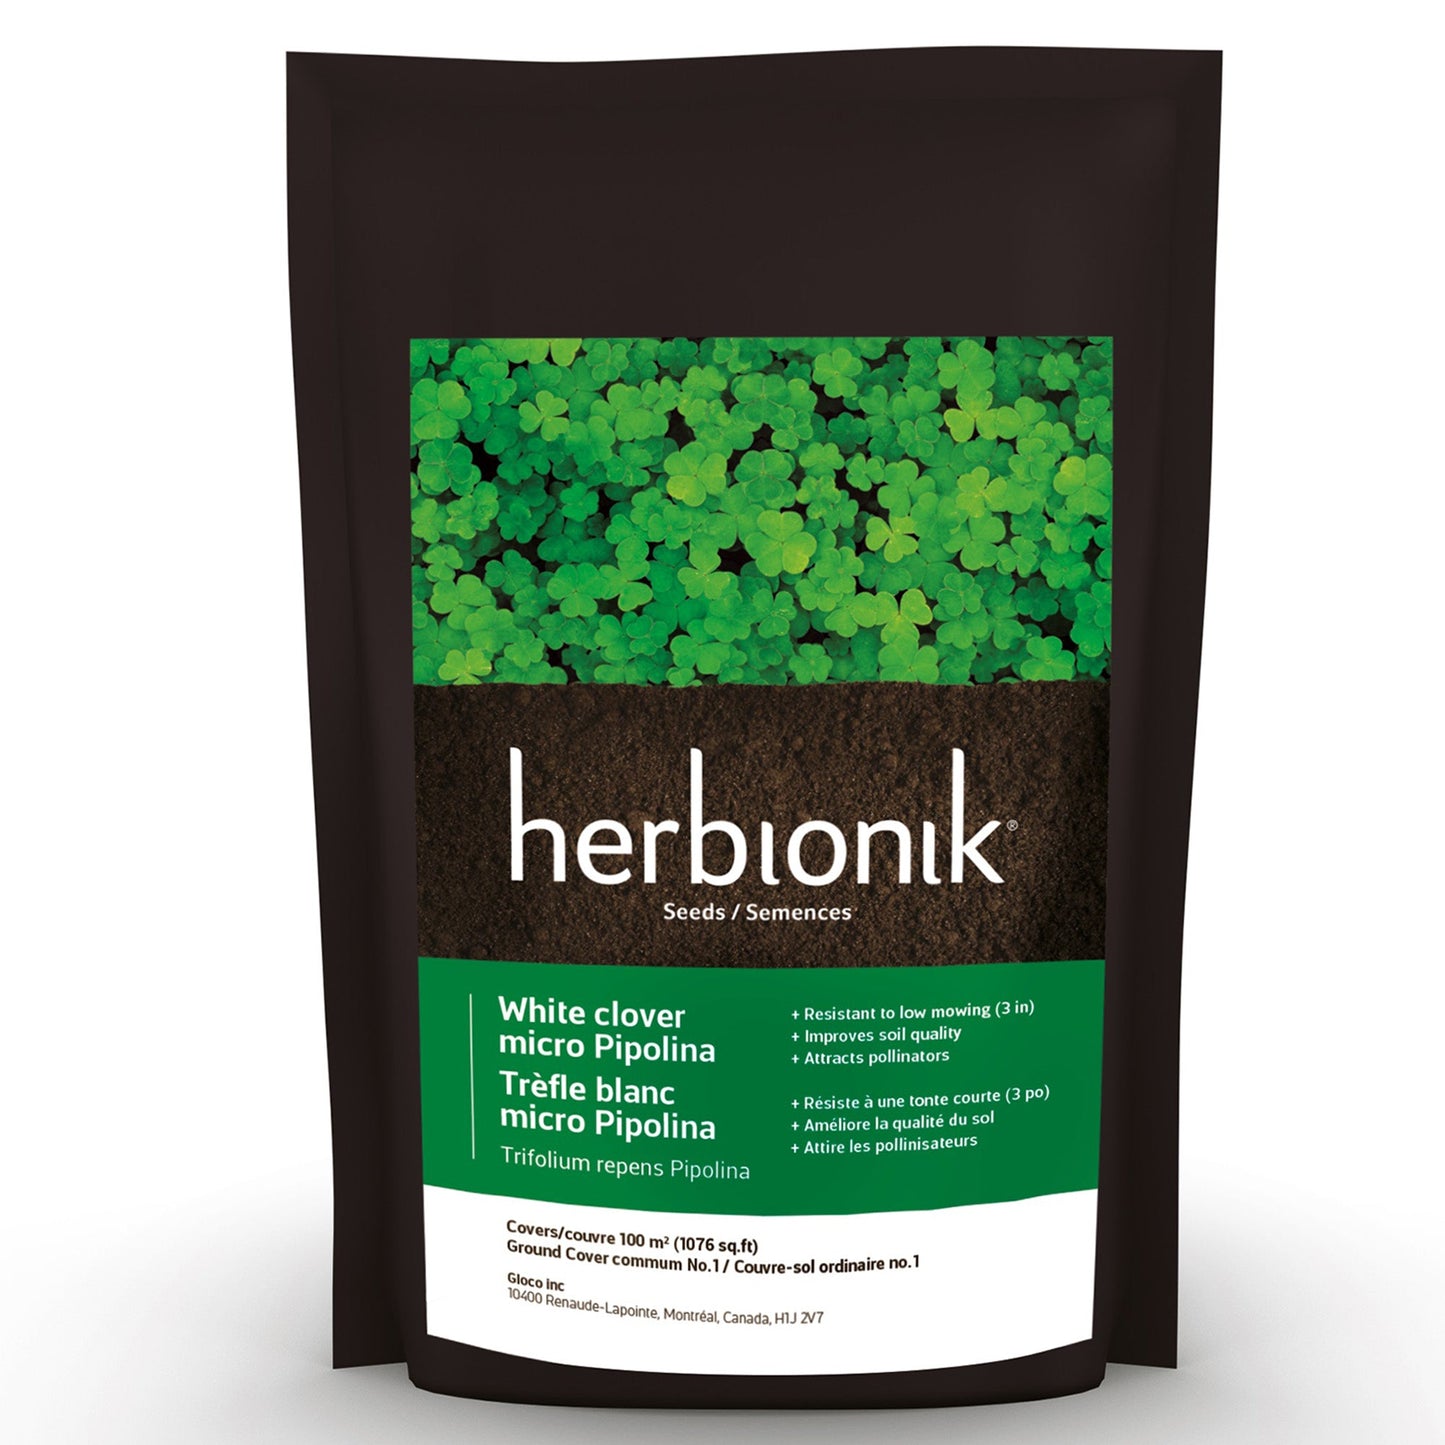 Herbionik Micro pipolina white clover grass seed